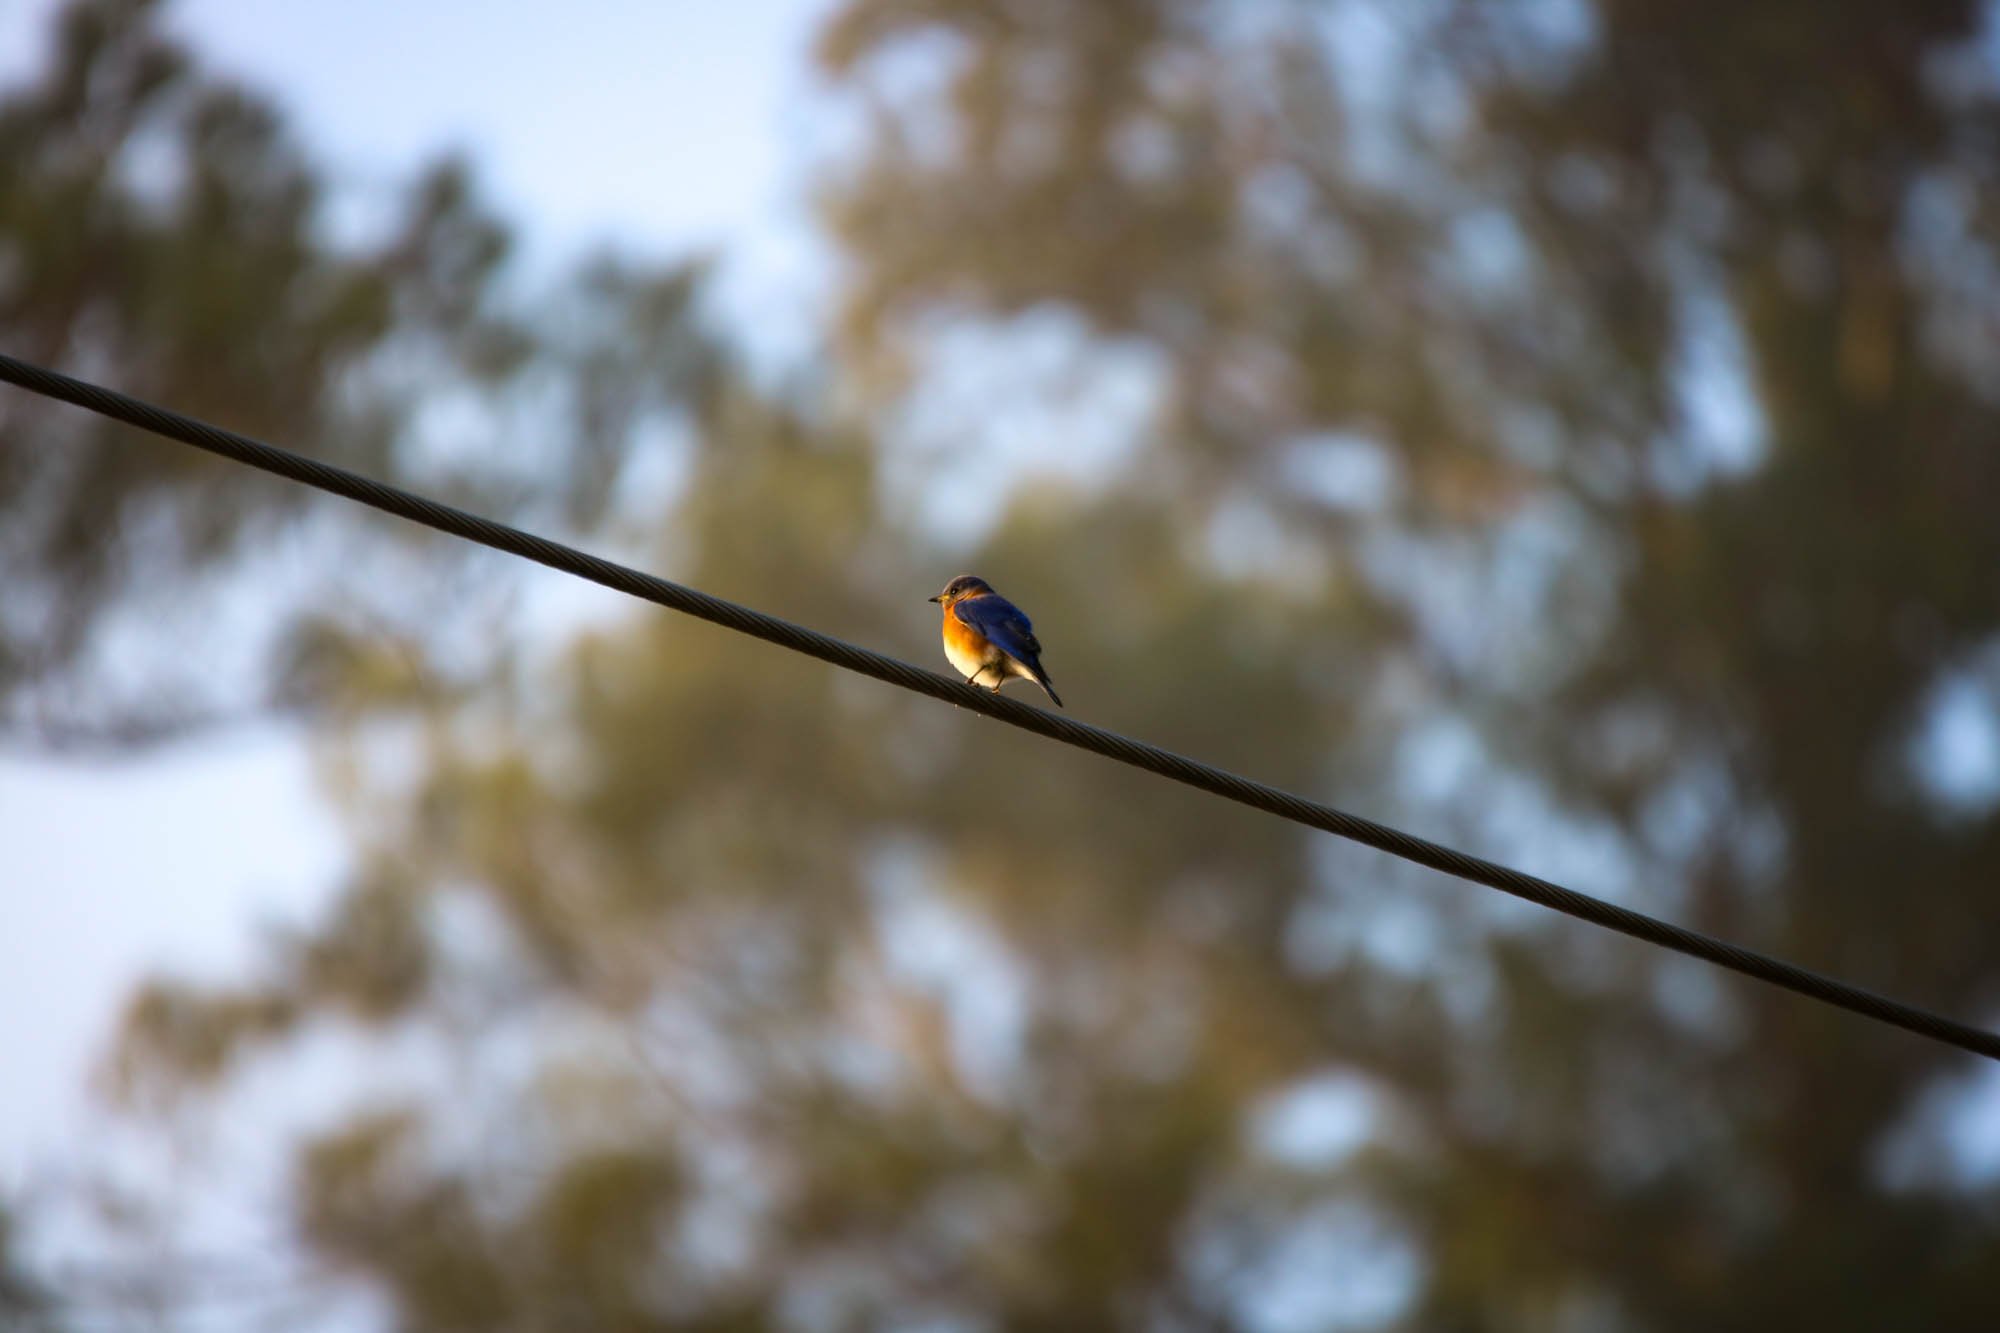 Bluebird perched on an electrical wire just above a nesting spot.